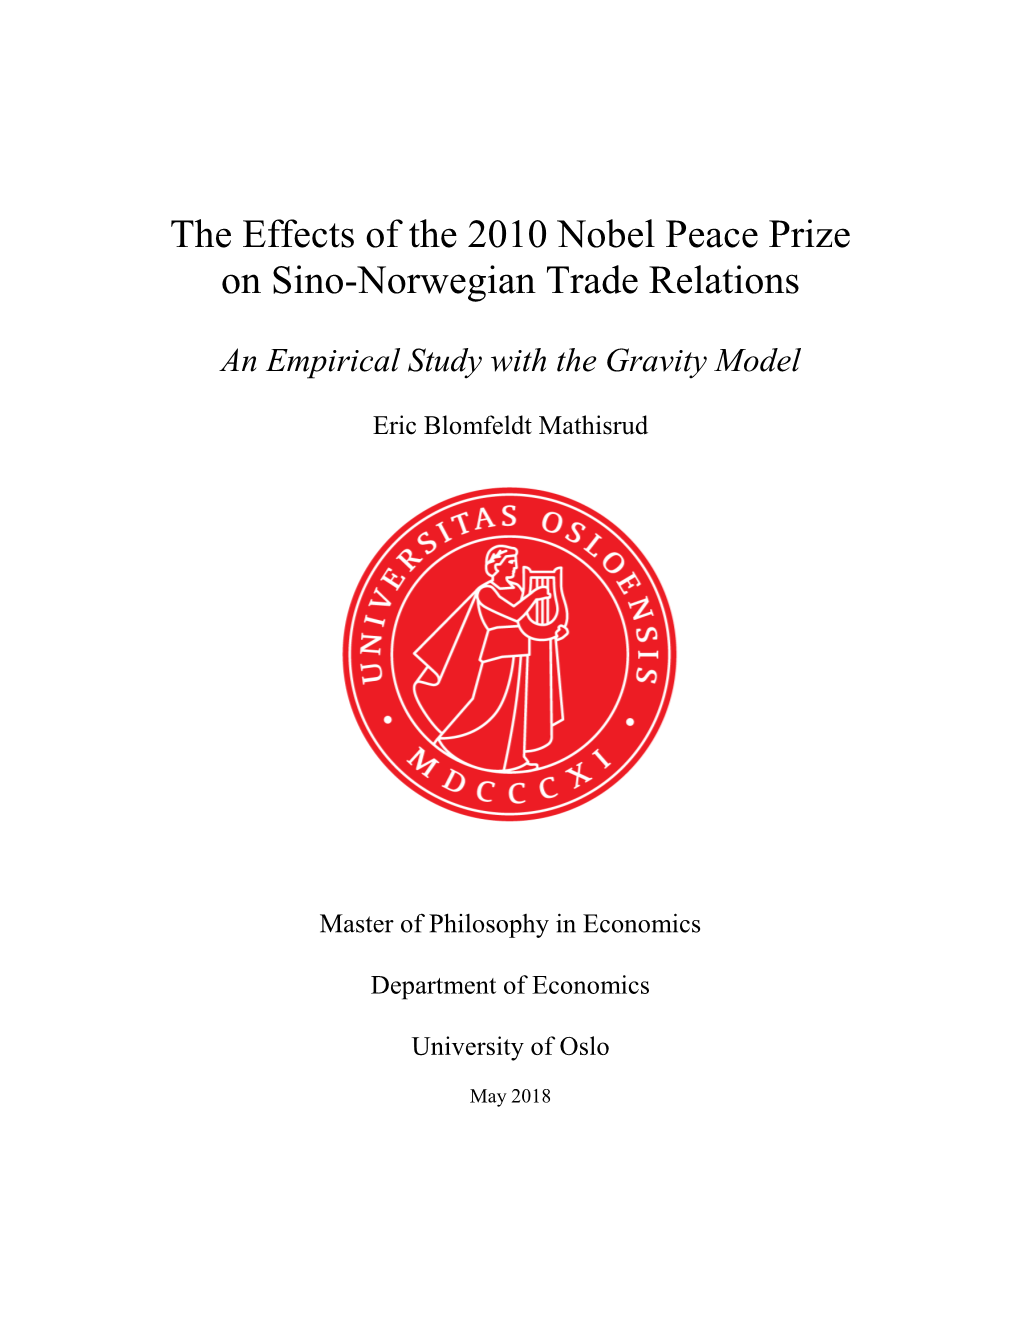 The Effects of the 2010 Nobel Peace Prize on Sino-Norwegian Trade Relations